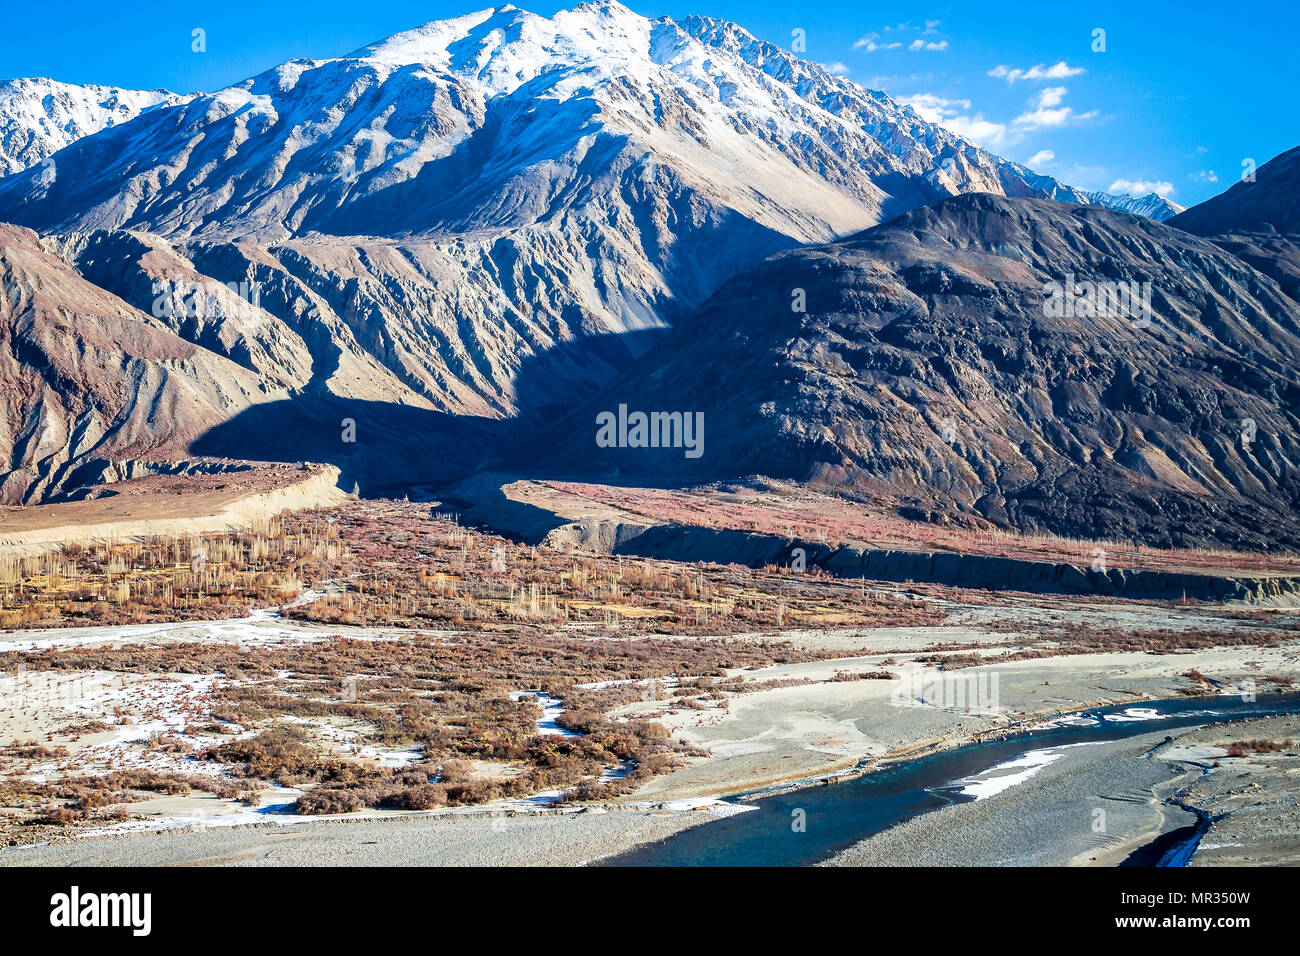 High Barren Mountain - Hanley River flowing through the rock sharp mountains in the west of Ladakh range with just a pinch of snow to crown it. Stock Photo